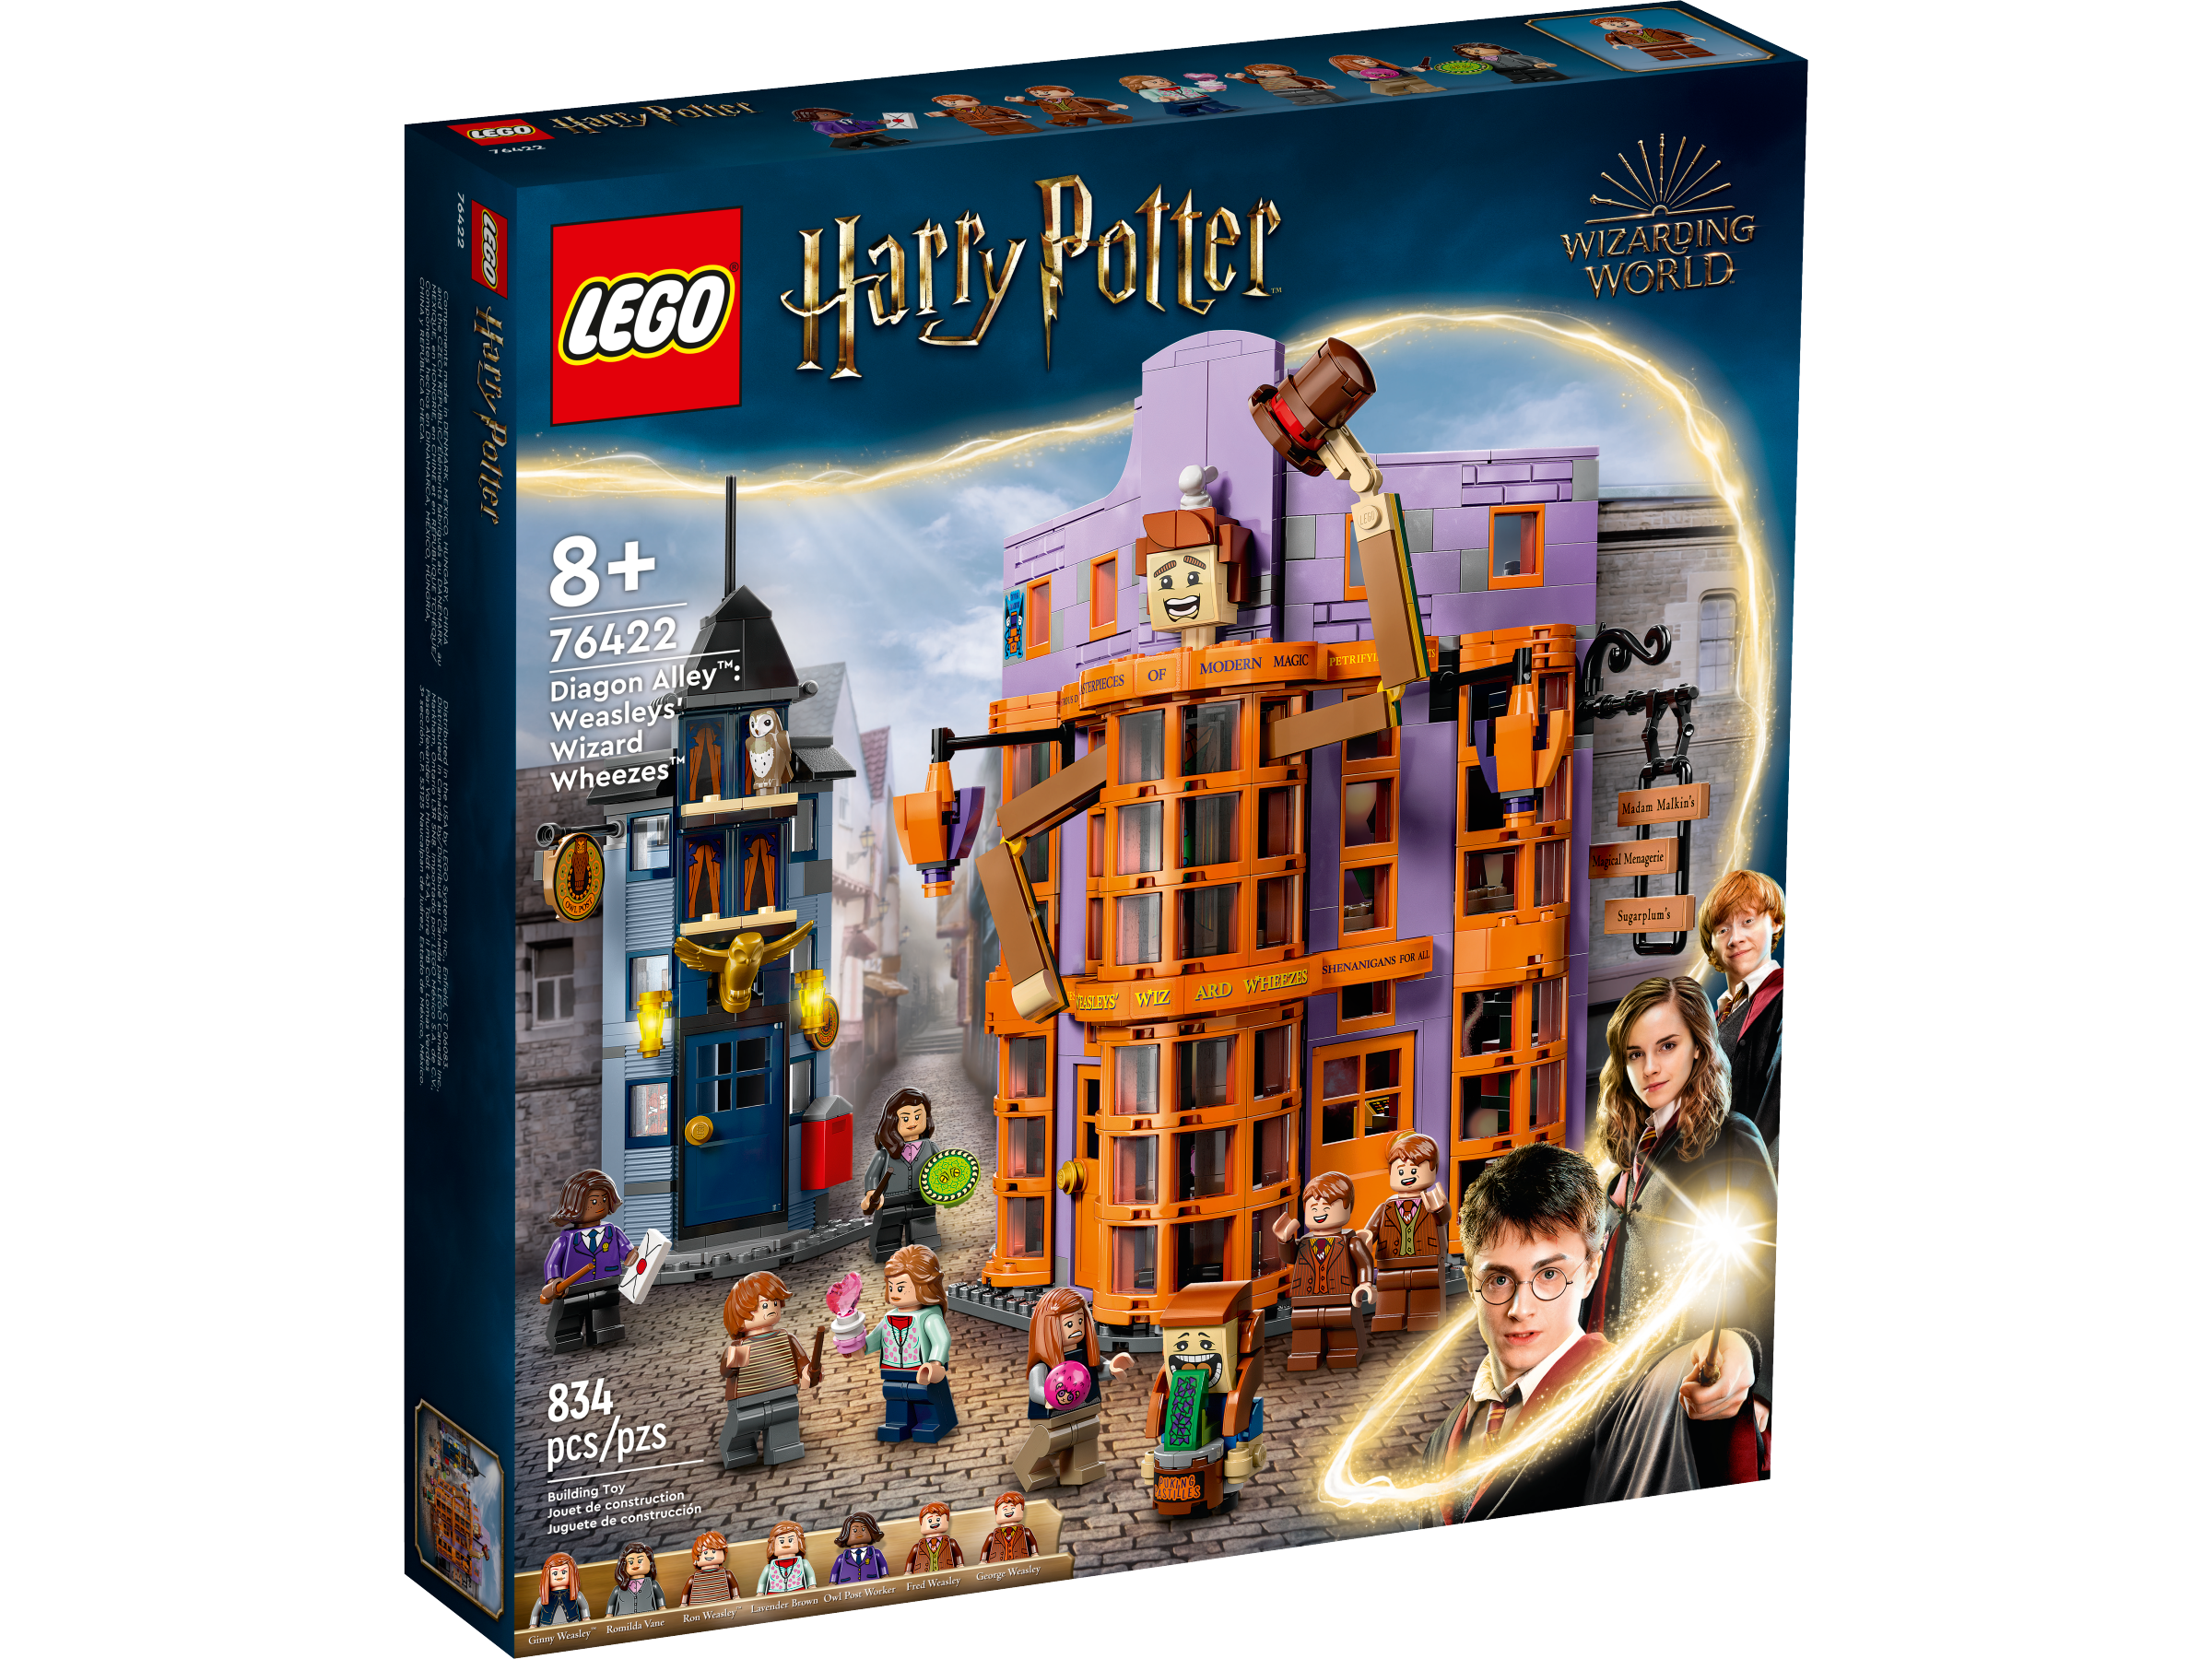 forfatter Uskyld Monet Diagon Alley™: Weasleys' Wizard Wheezes™ 76422 | Harry Potter™ | Buy online  at the Official LEGO® Shop US